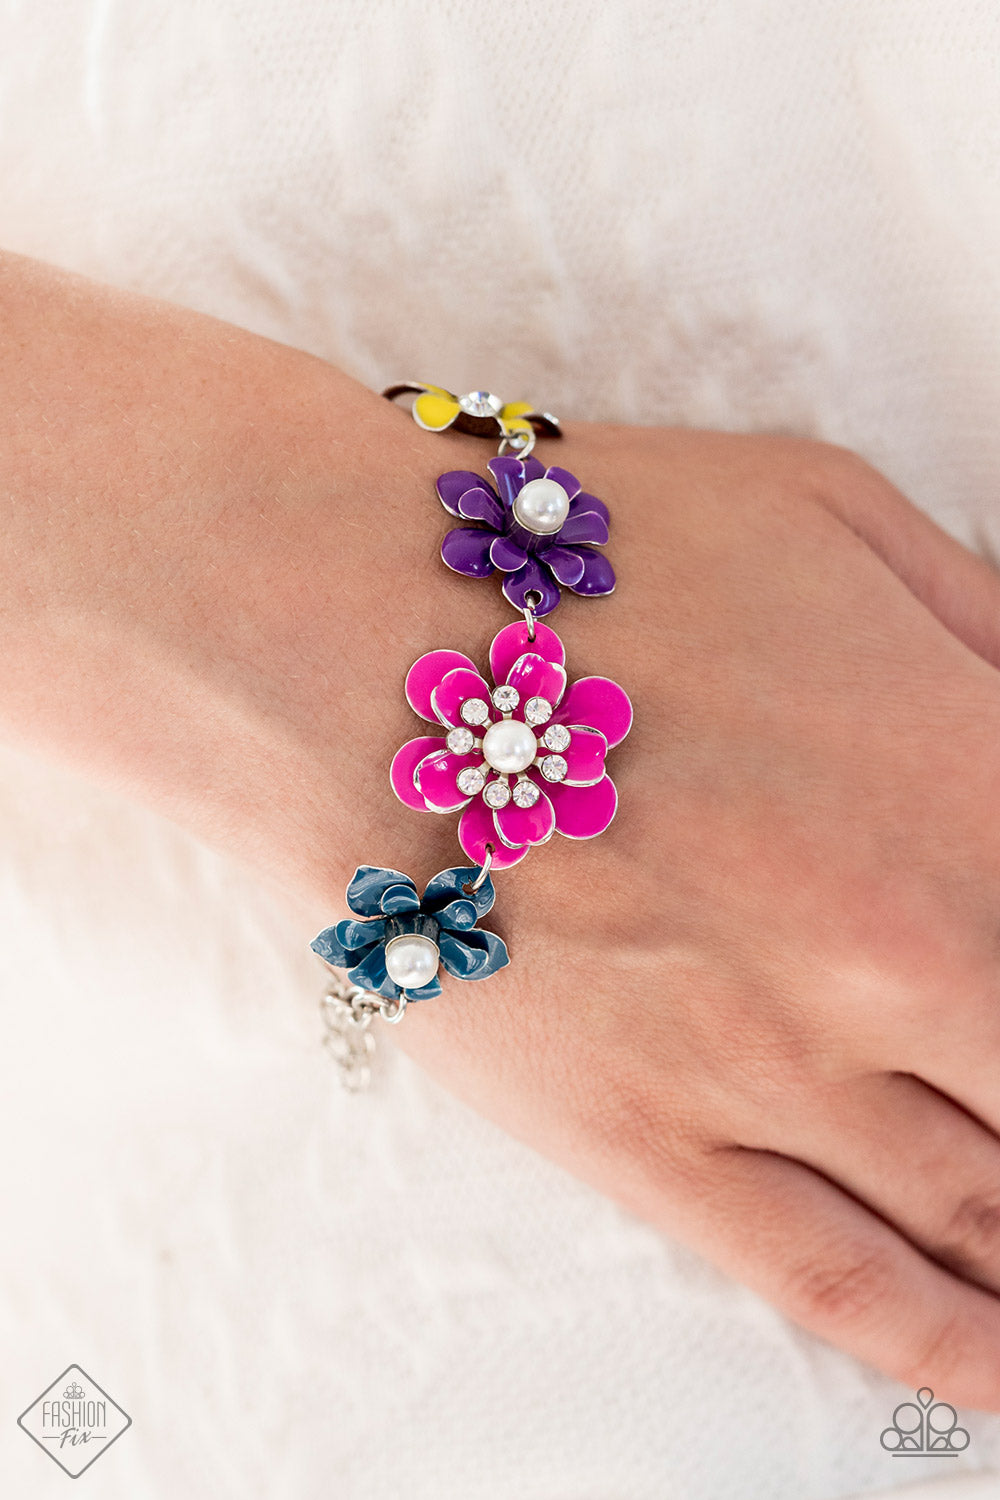 Flower Patch Fantasy - Multi Color Flower Bracelet - Paparazzi Accessories - A collection of colorful flowers link around the wrist to create a vibrant statement piece. A mix of shimmery pearls and sparkling white rhinestones decorate the center of each flower, infusing the piece with handcrafted whimsicality. Features an adjustable clasp closure fashion bracelet.